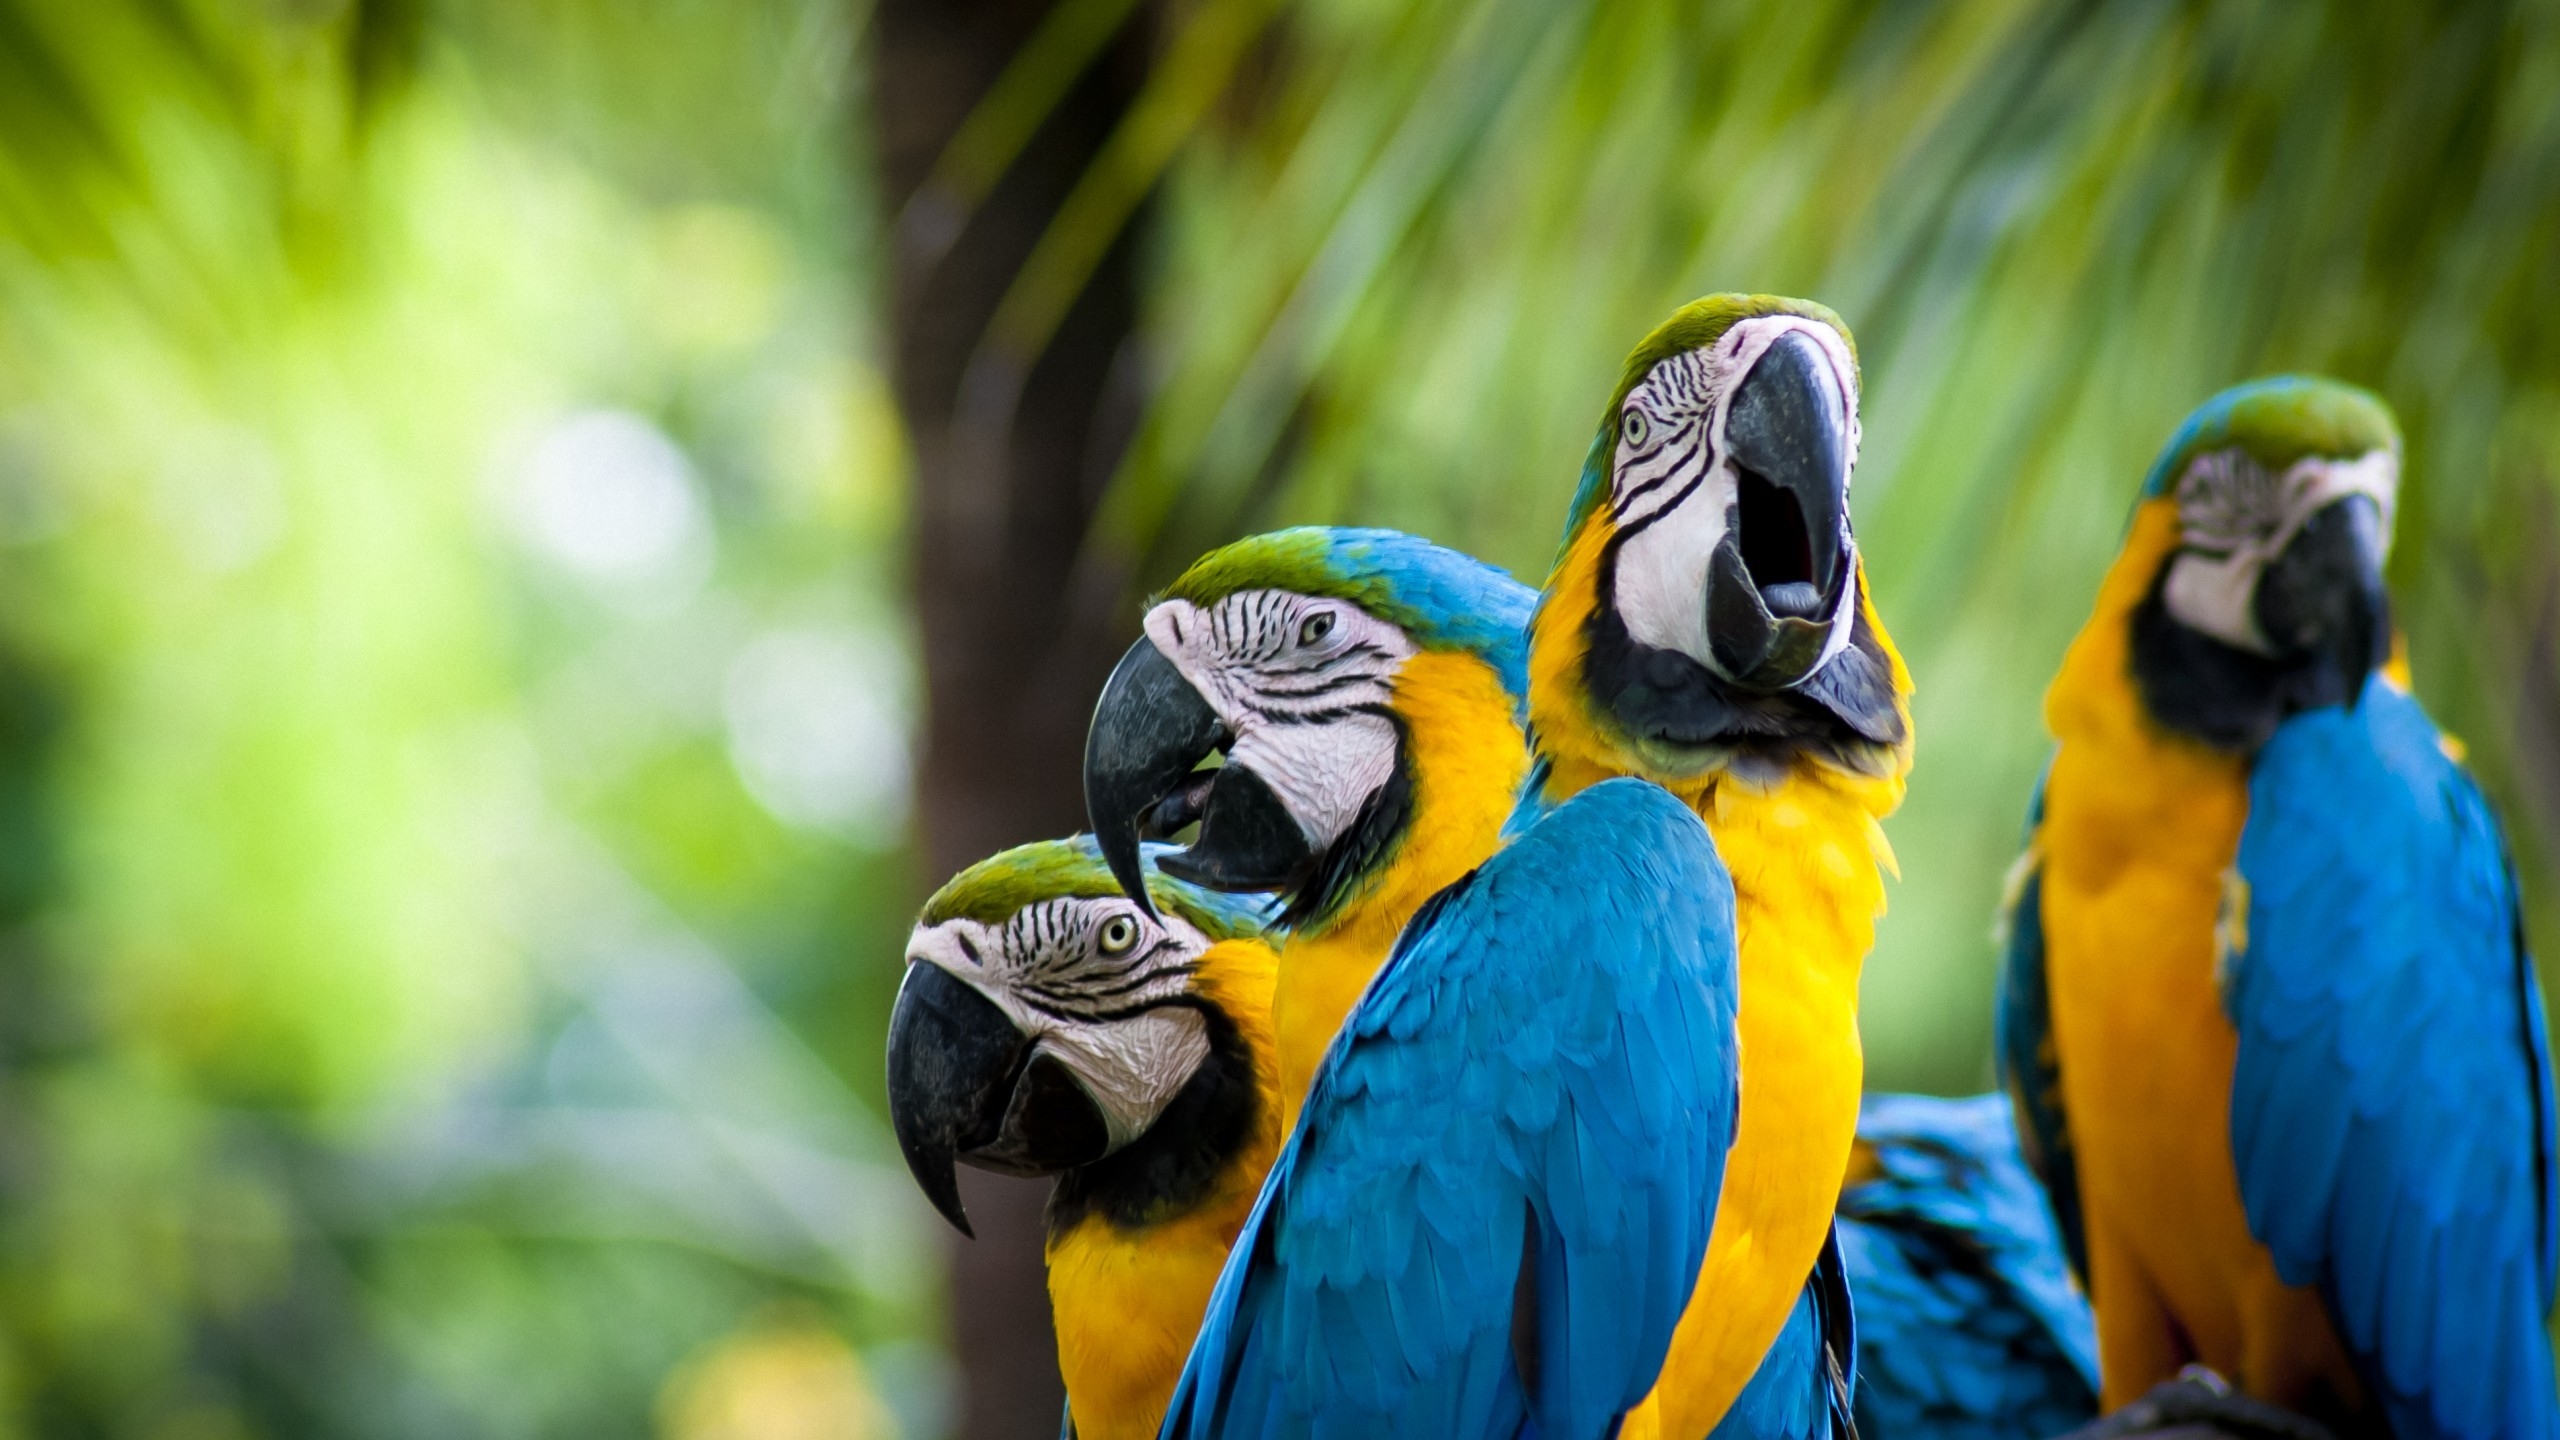 Beautiful Parrots Family for 2560x1440 HDTV resolution